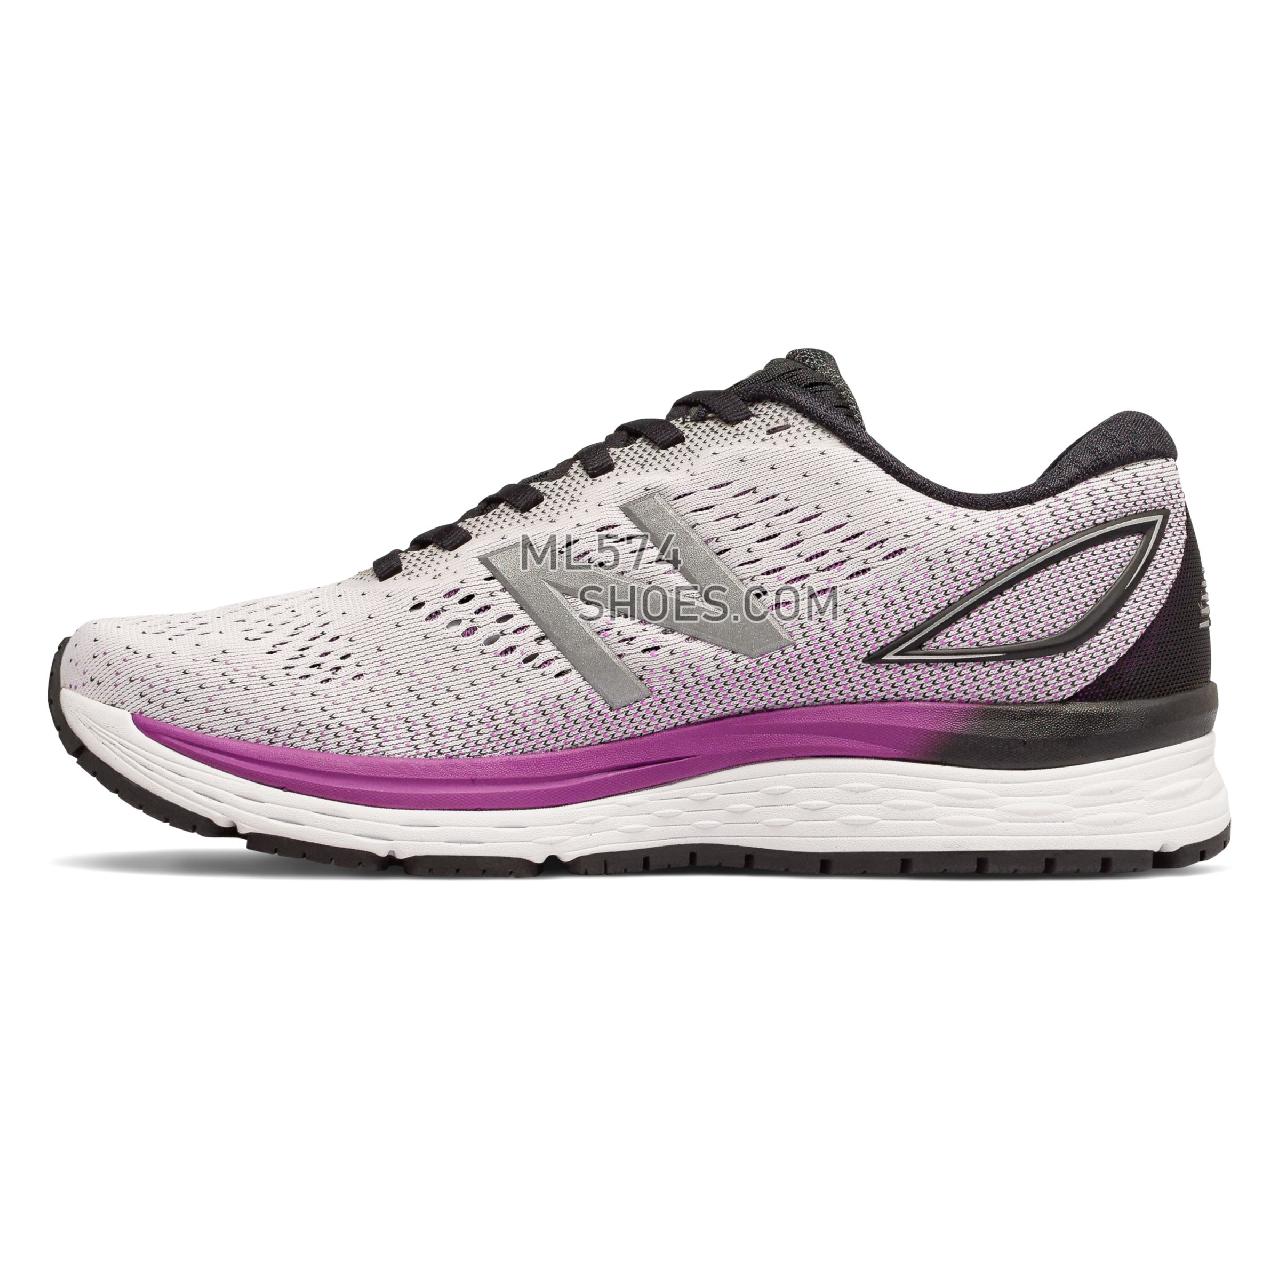 New Balance 880v9 - Women's Neutral Running - White with Voltage Violet and Black - W880WT9